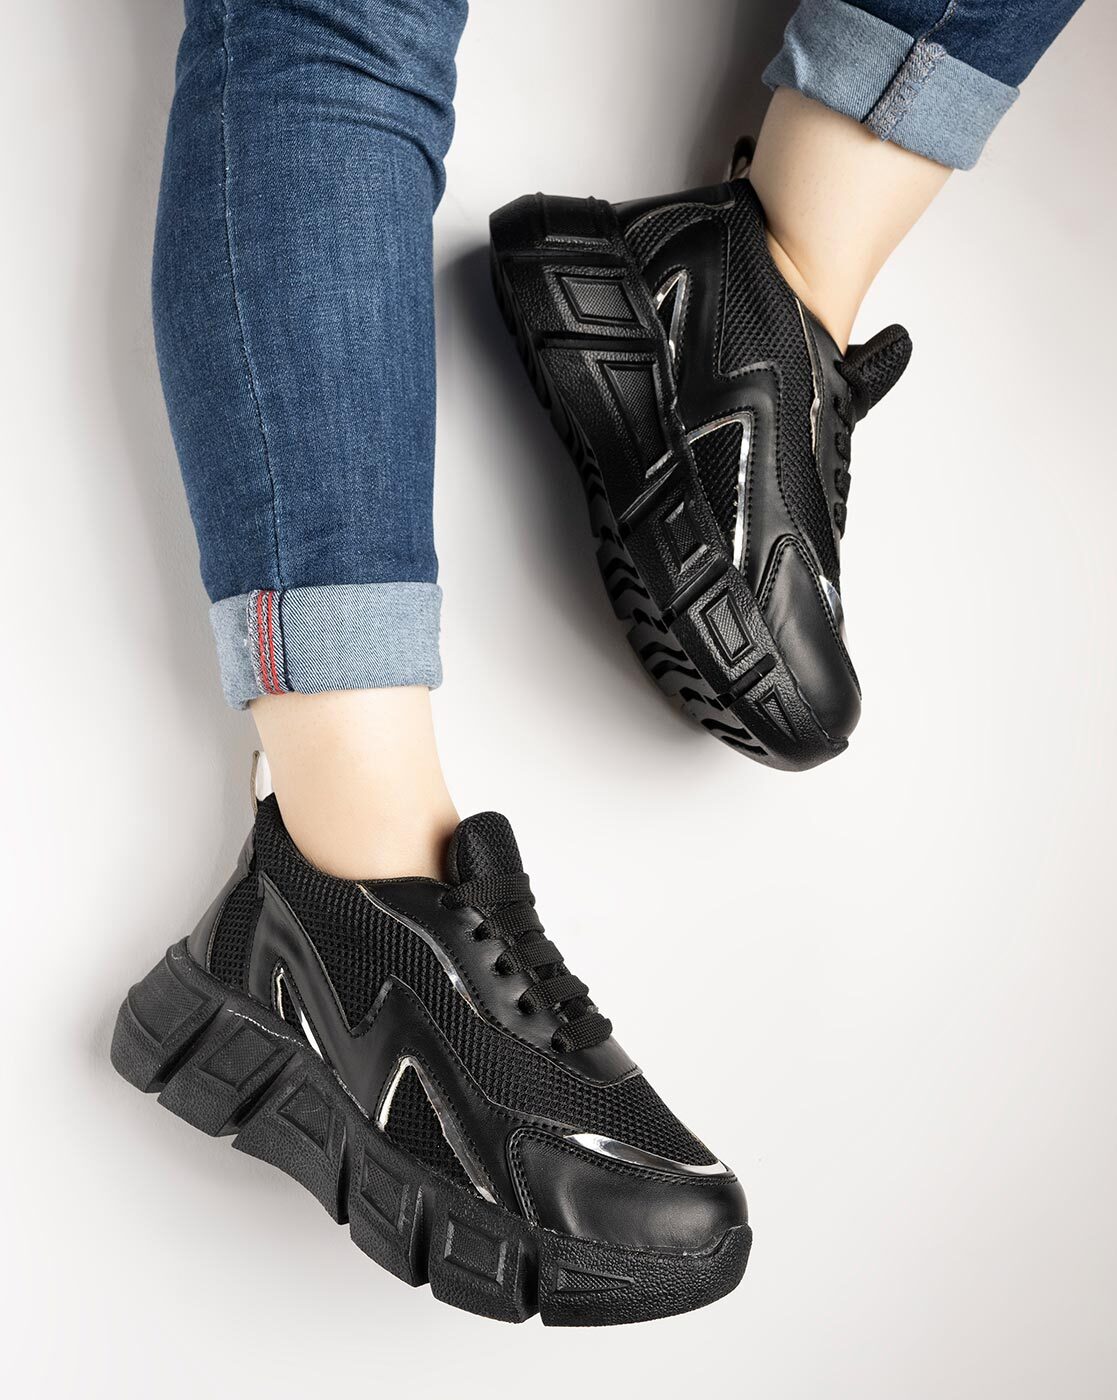 Discover 187+ black sneakers for girls super hot